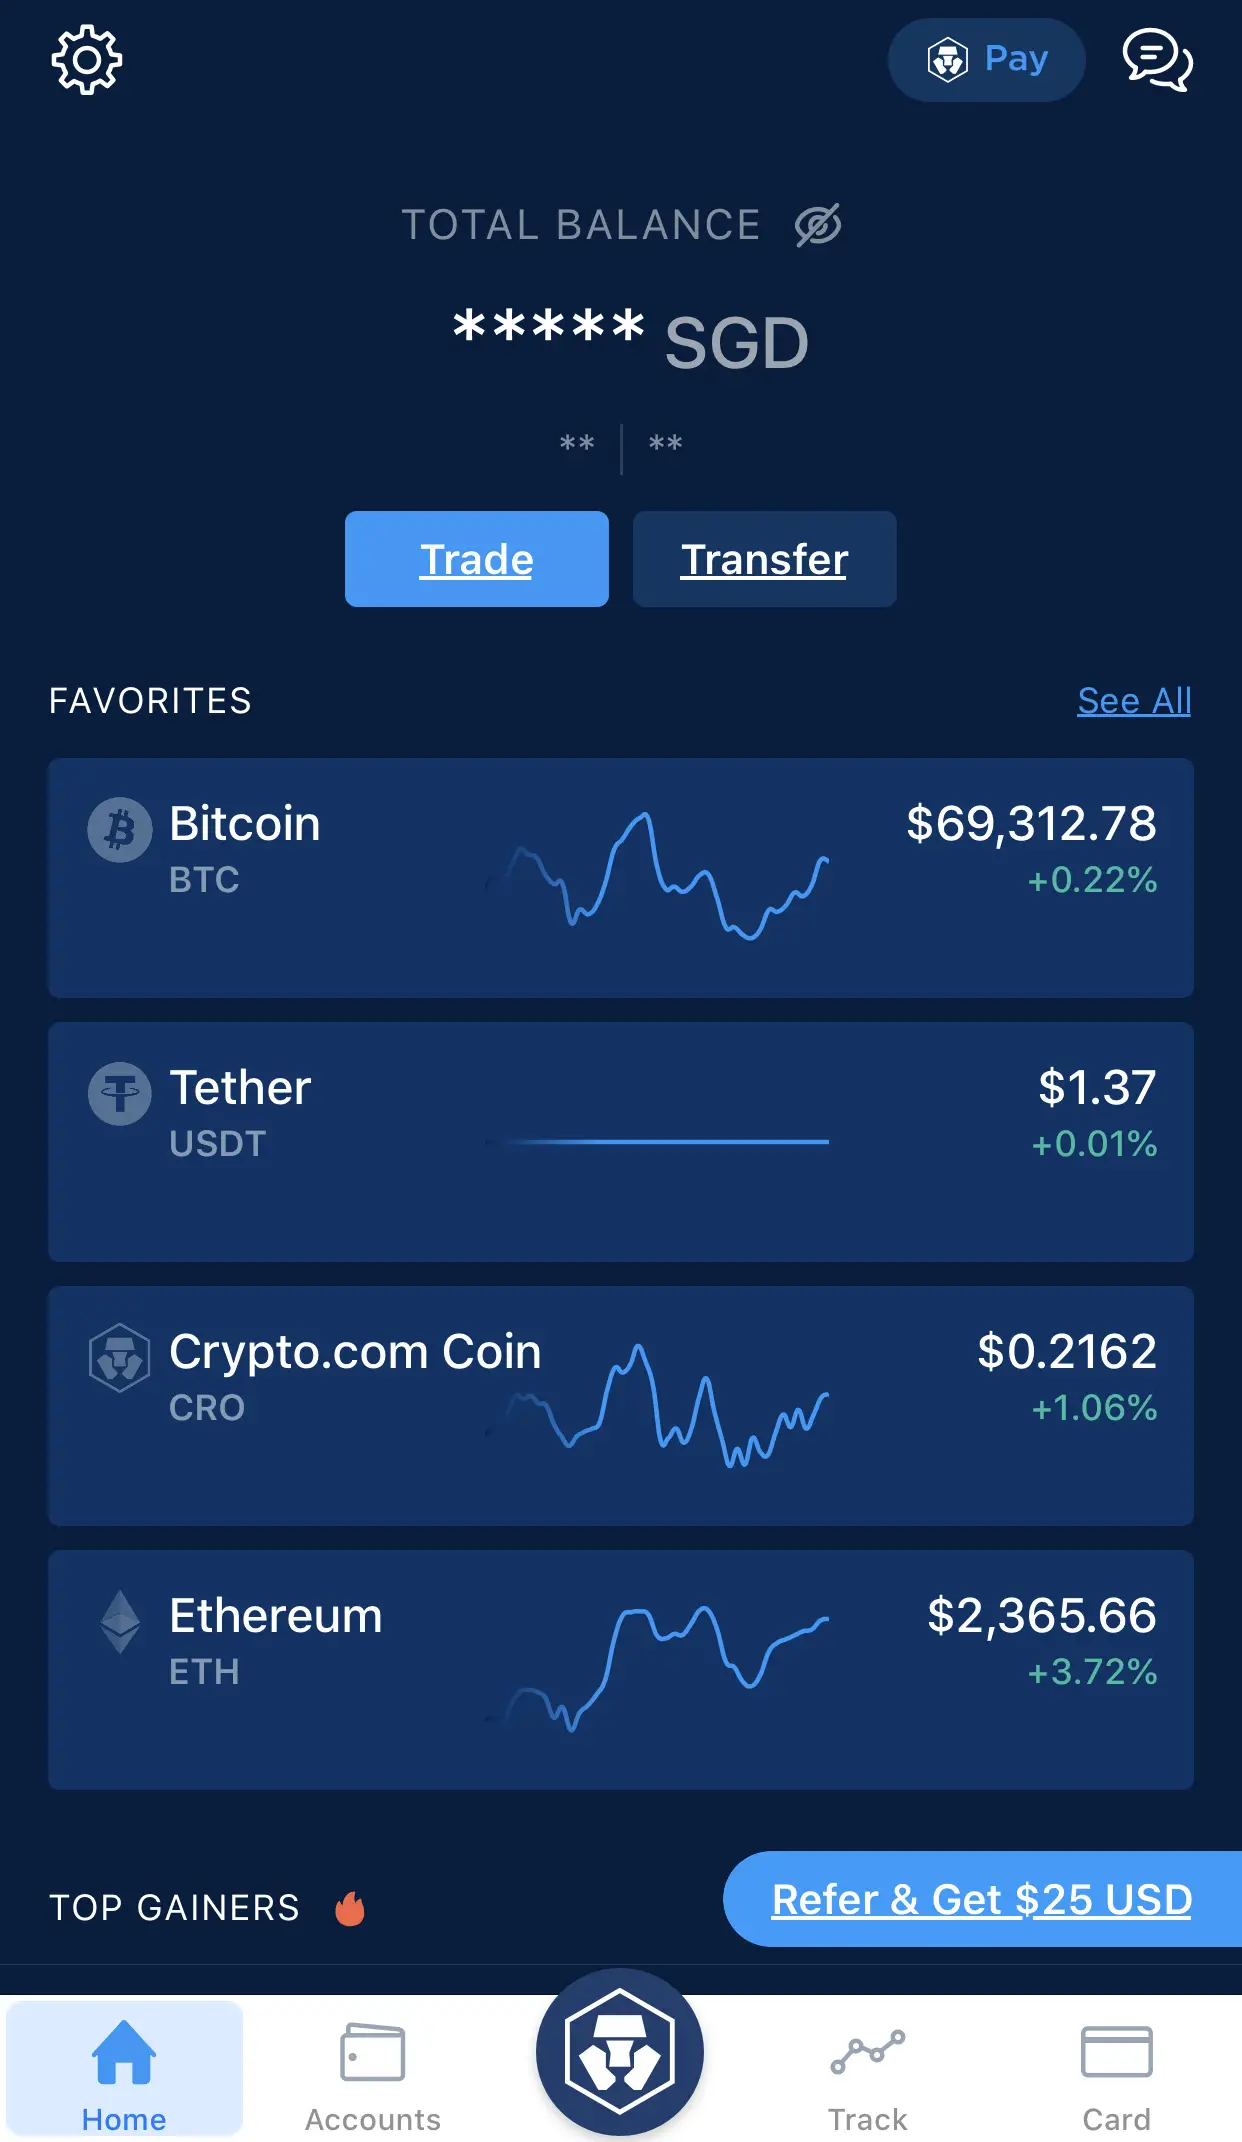 how to connect crypto.com app and exchange